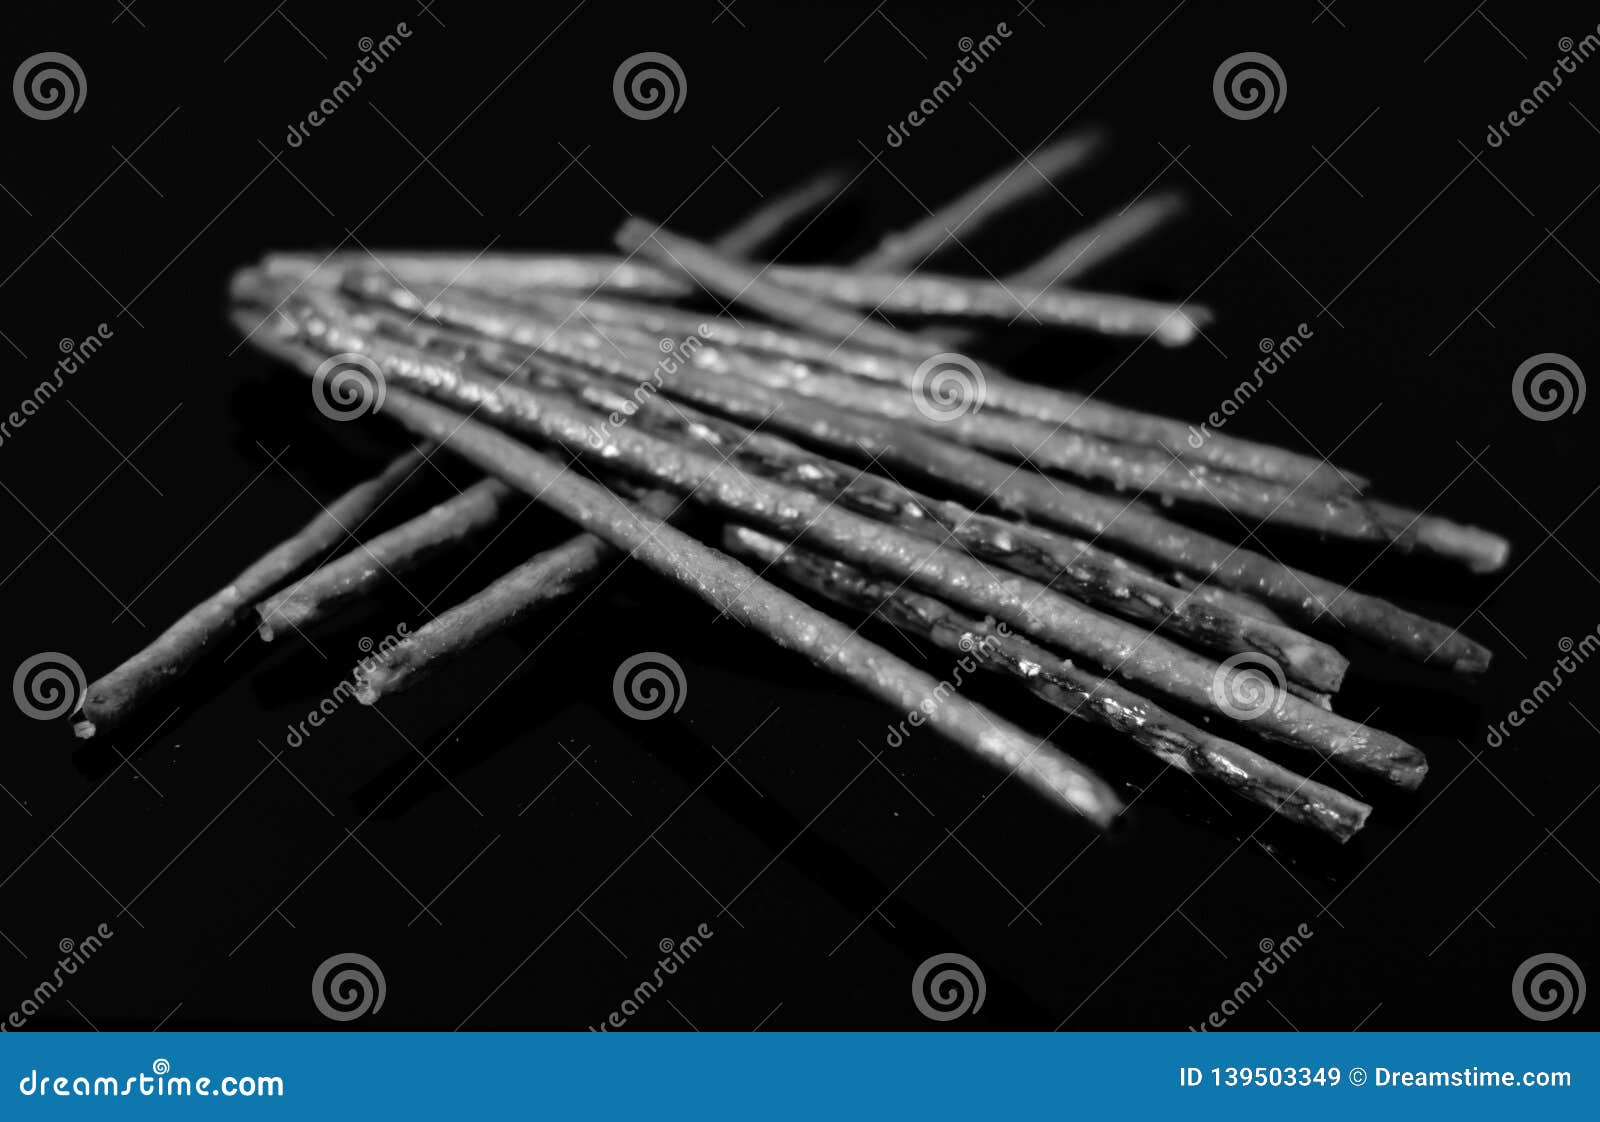 Straws and Salty Sticks on a Mirror Table Stock Image - Image of ...